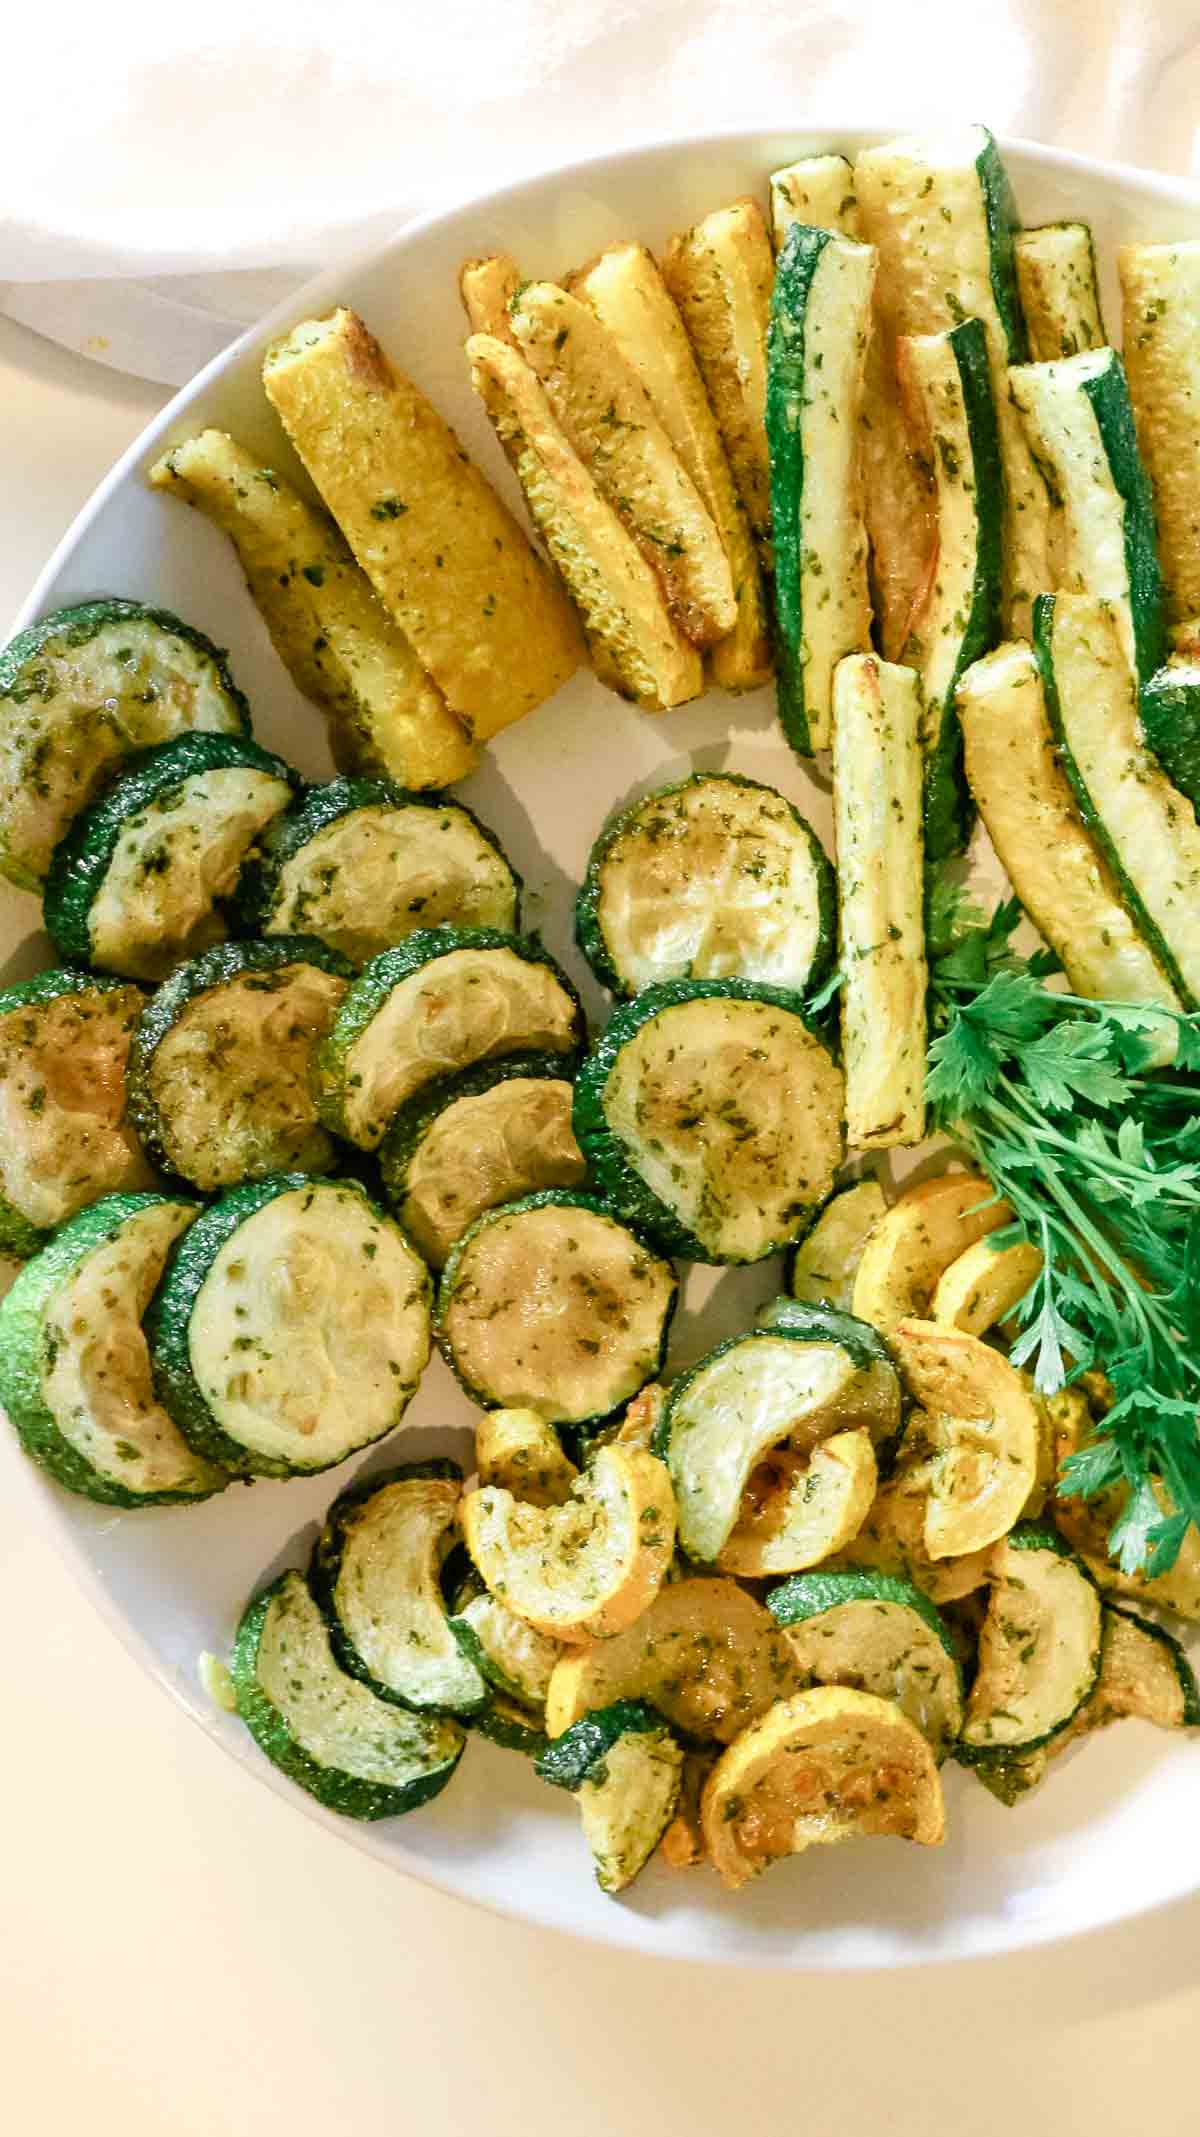 roasted zucchini rounds and zucchini fries on a white plate.